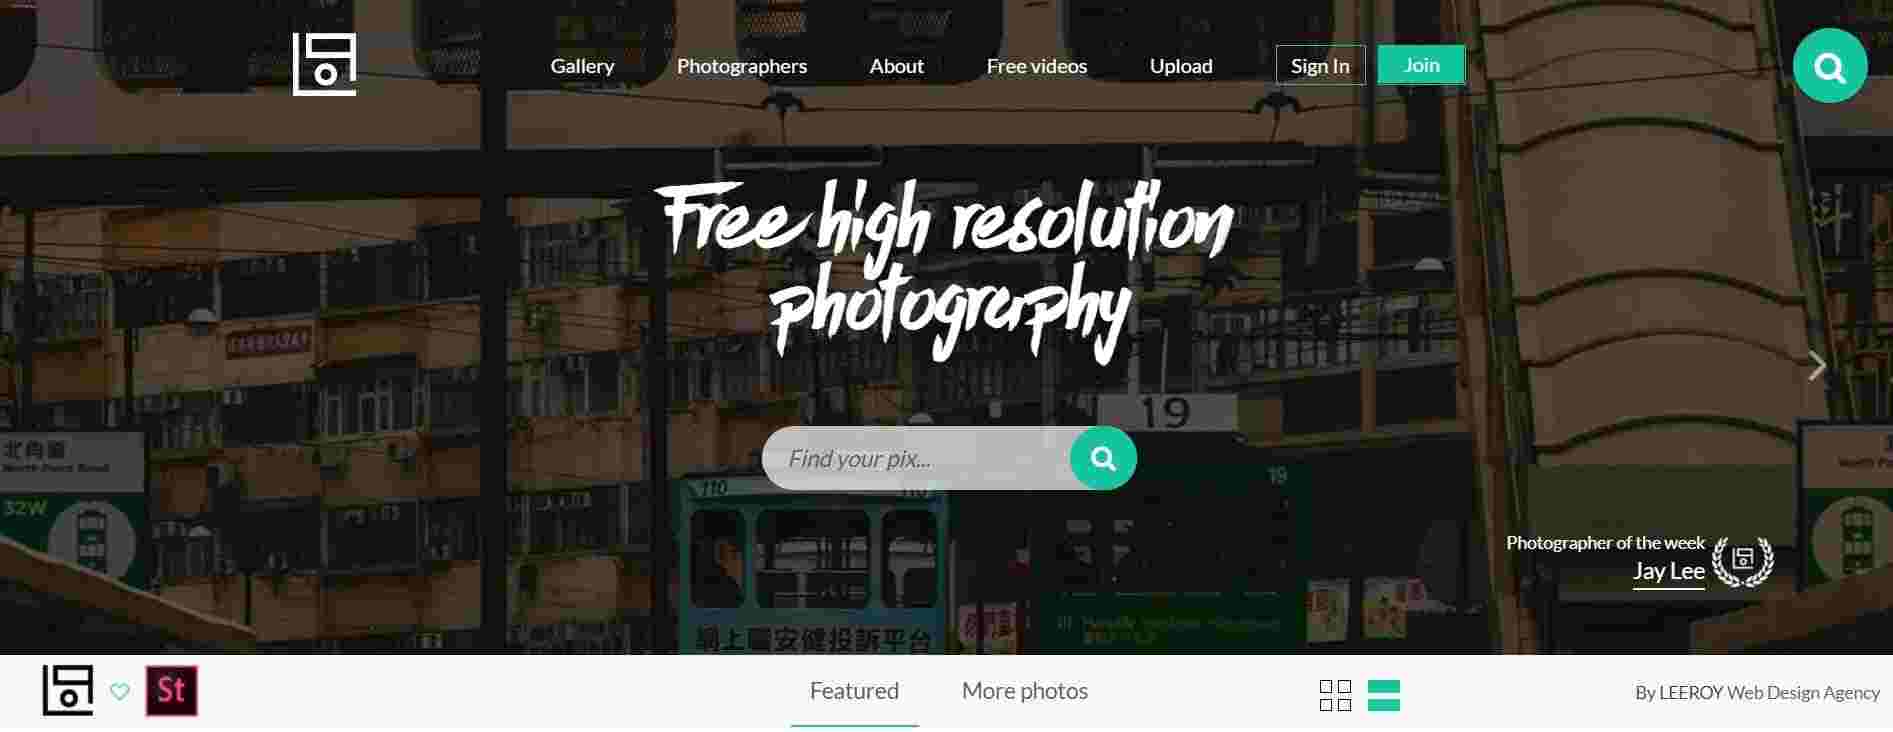 Life Of Pix: Free high resolution photography